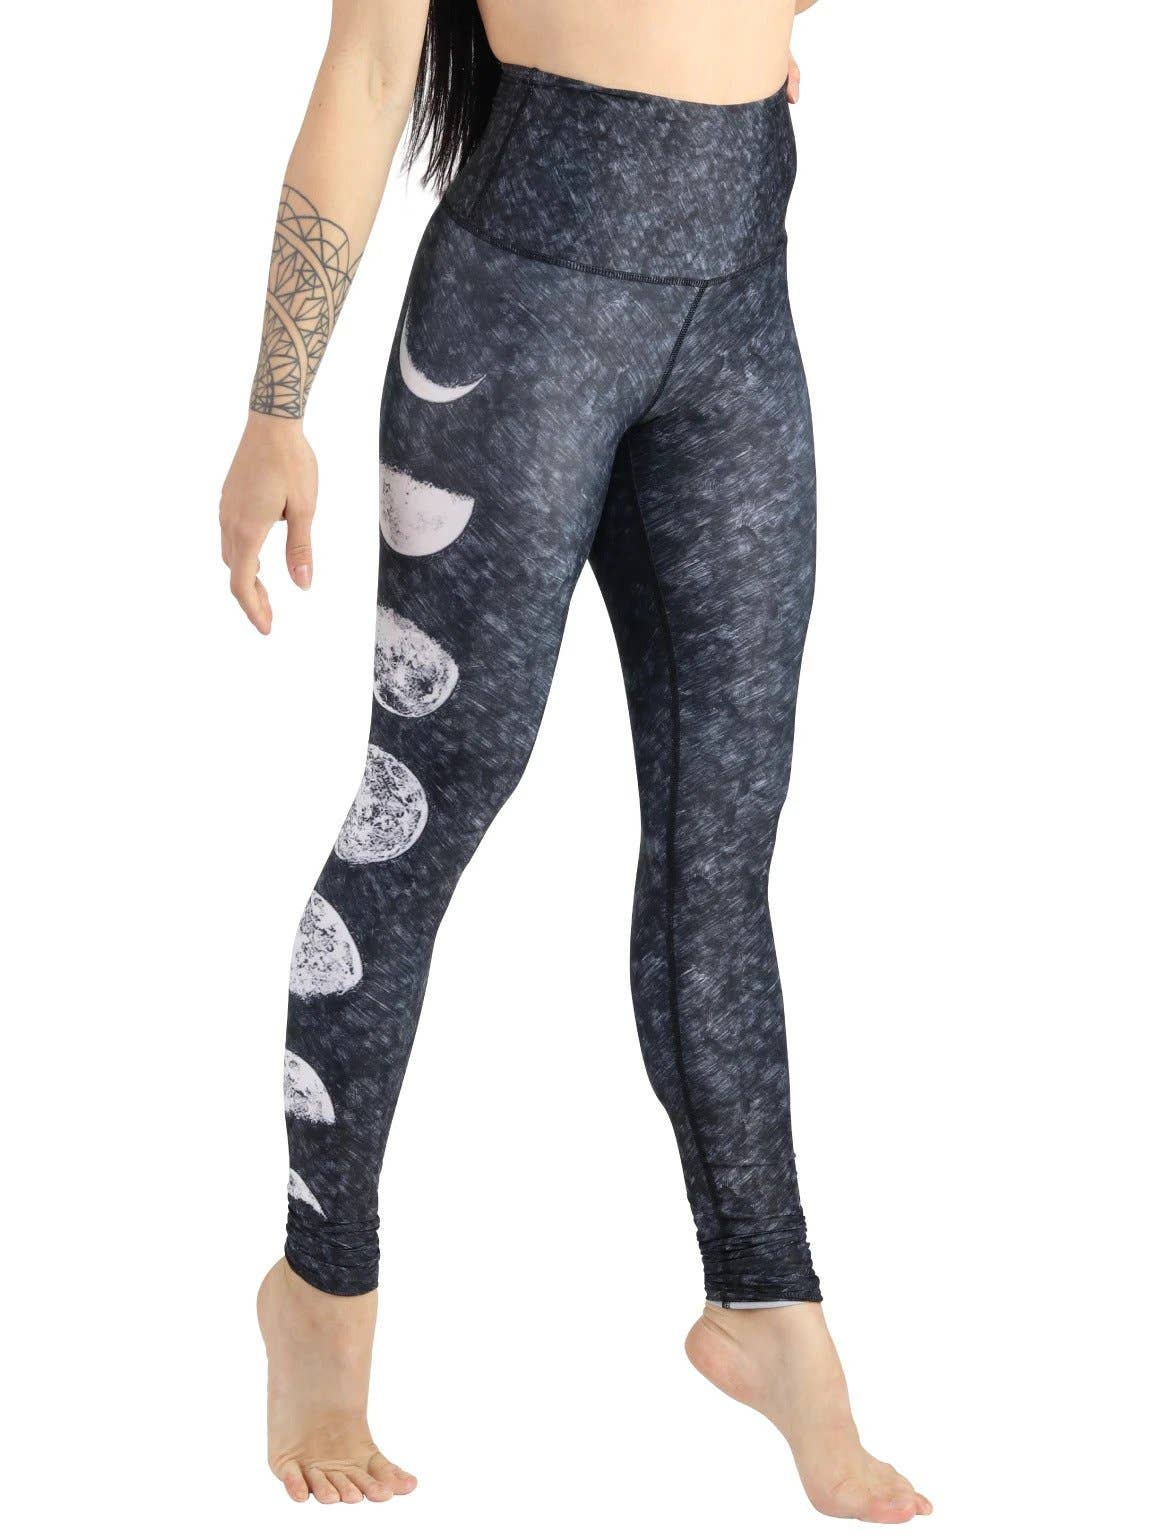 Wholesale Just a Dark Moon Phase Printed Yoga Leggings for your store ...